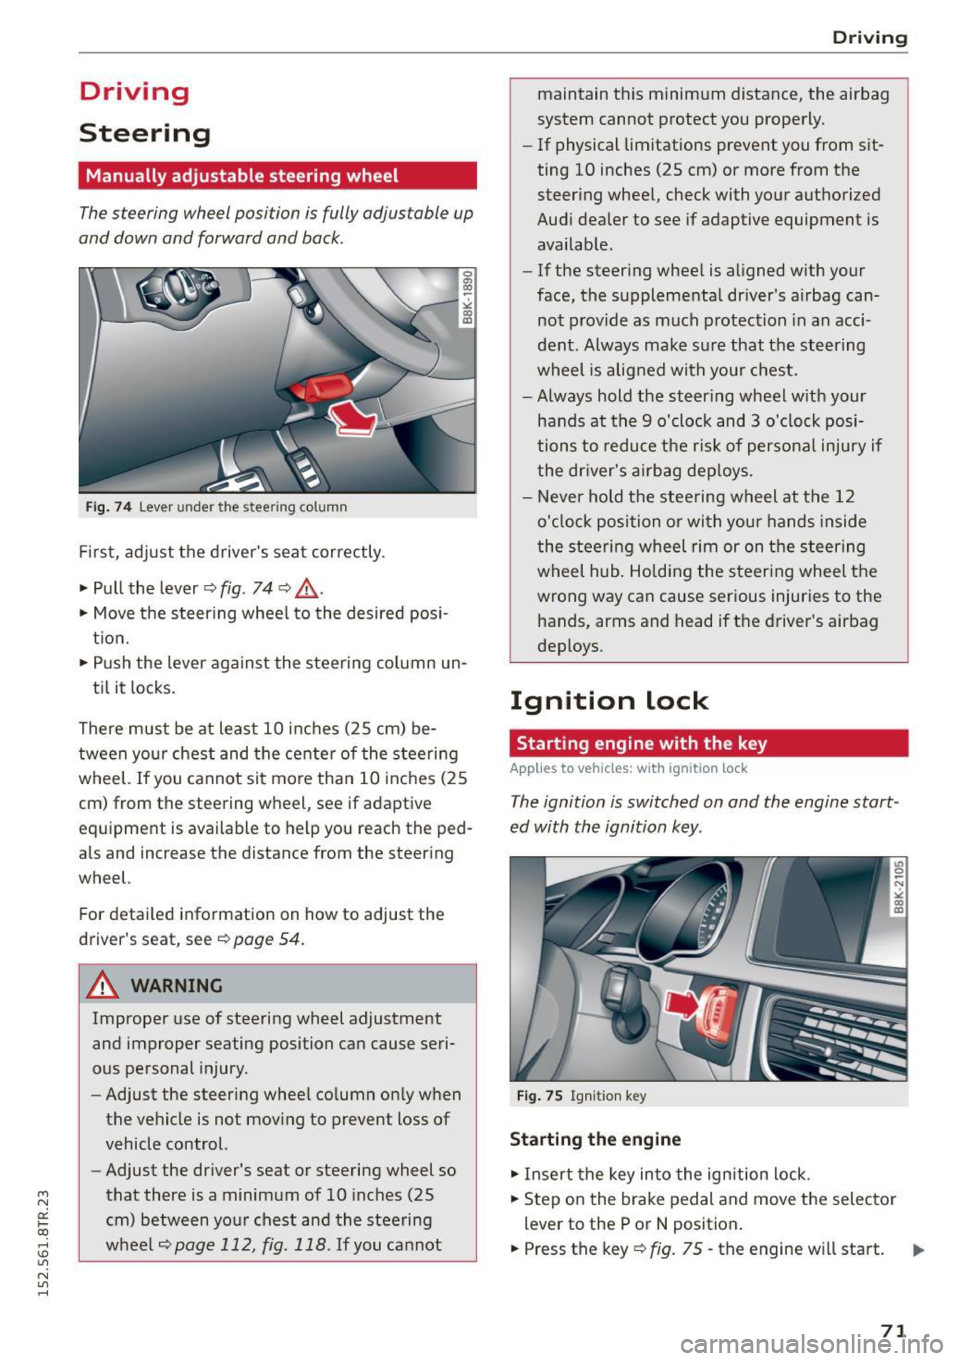 AUDI RS5 COUPE 2015  Owners Manual " N 
0:: l­oo 
rl I.O 
" N 
" rl 
Driving 
Steering 
Manually  adjustable  steering  wheel 
The steering  wheel  position  is  fully adjus table  up 
and  down  and  forward  and  back . 
Fig. 74 